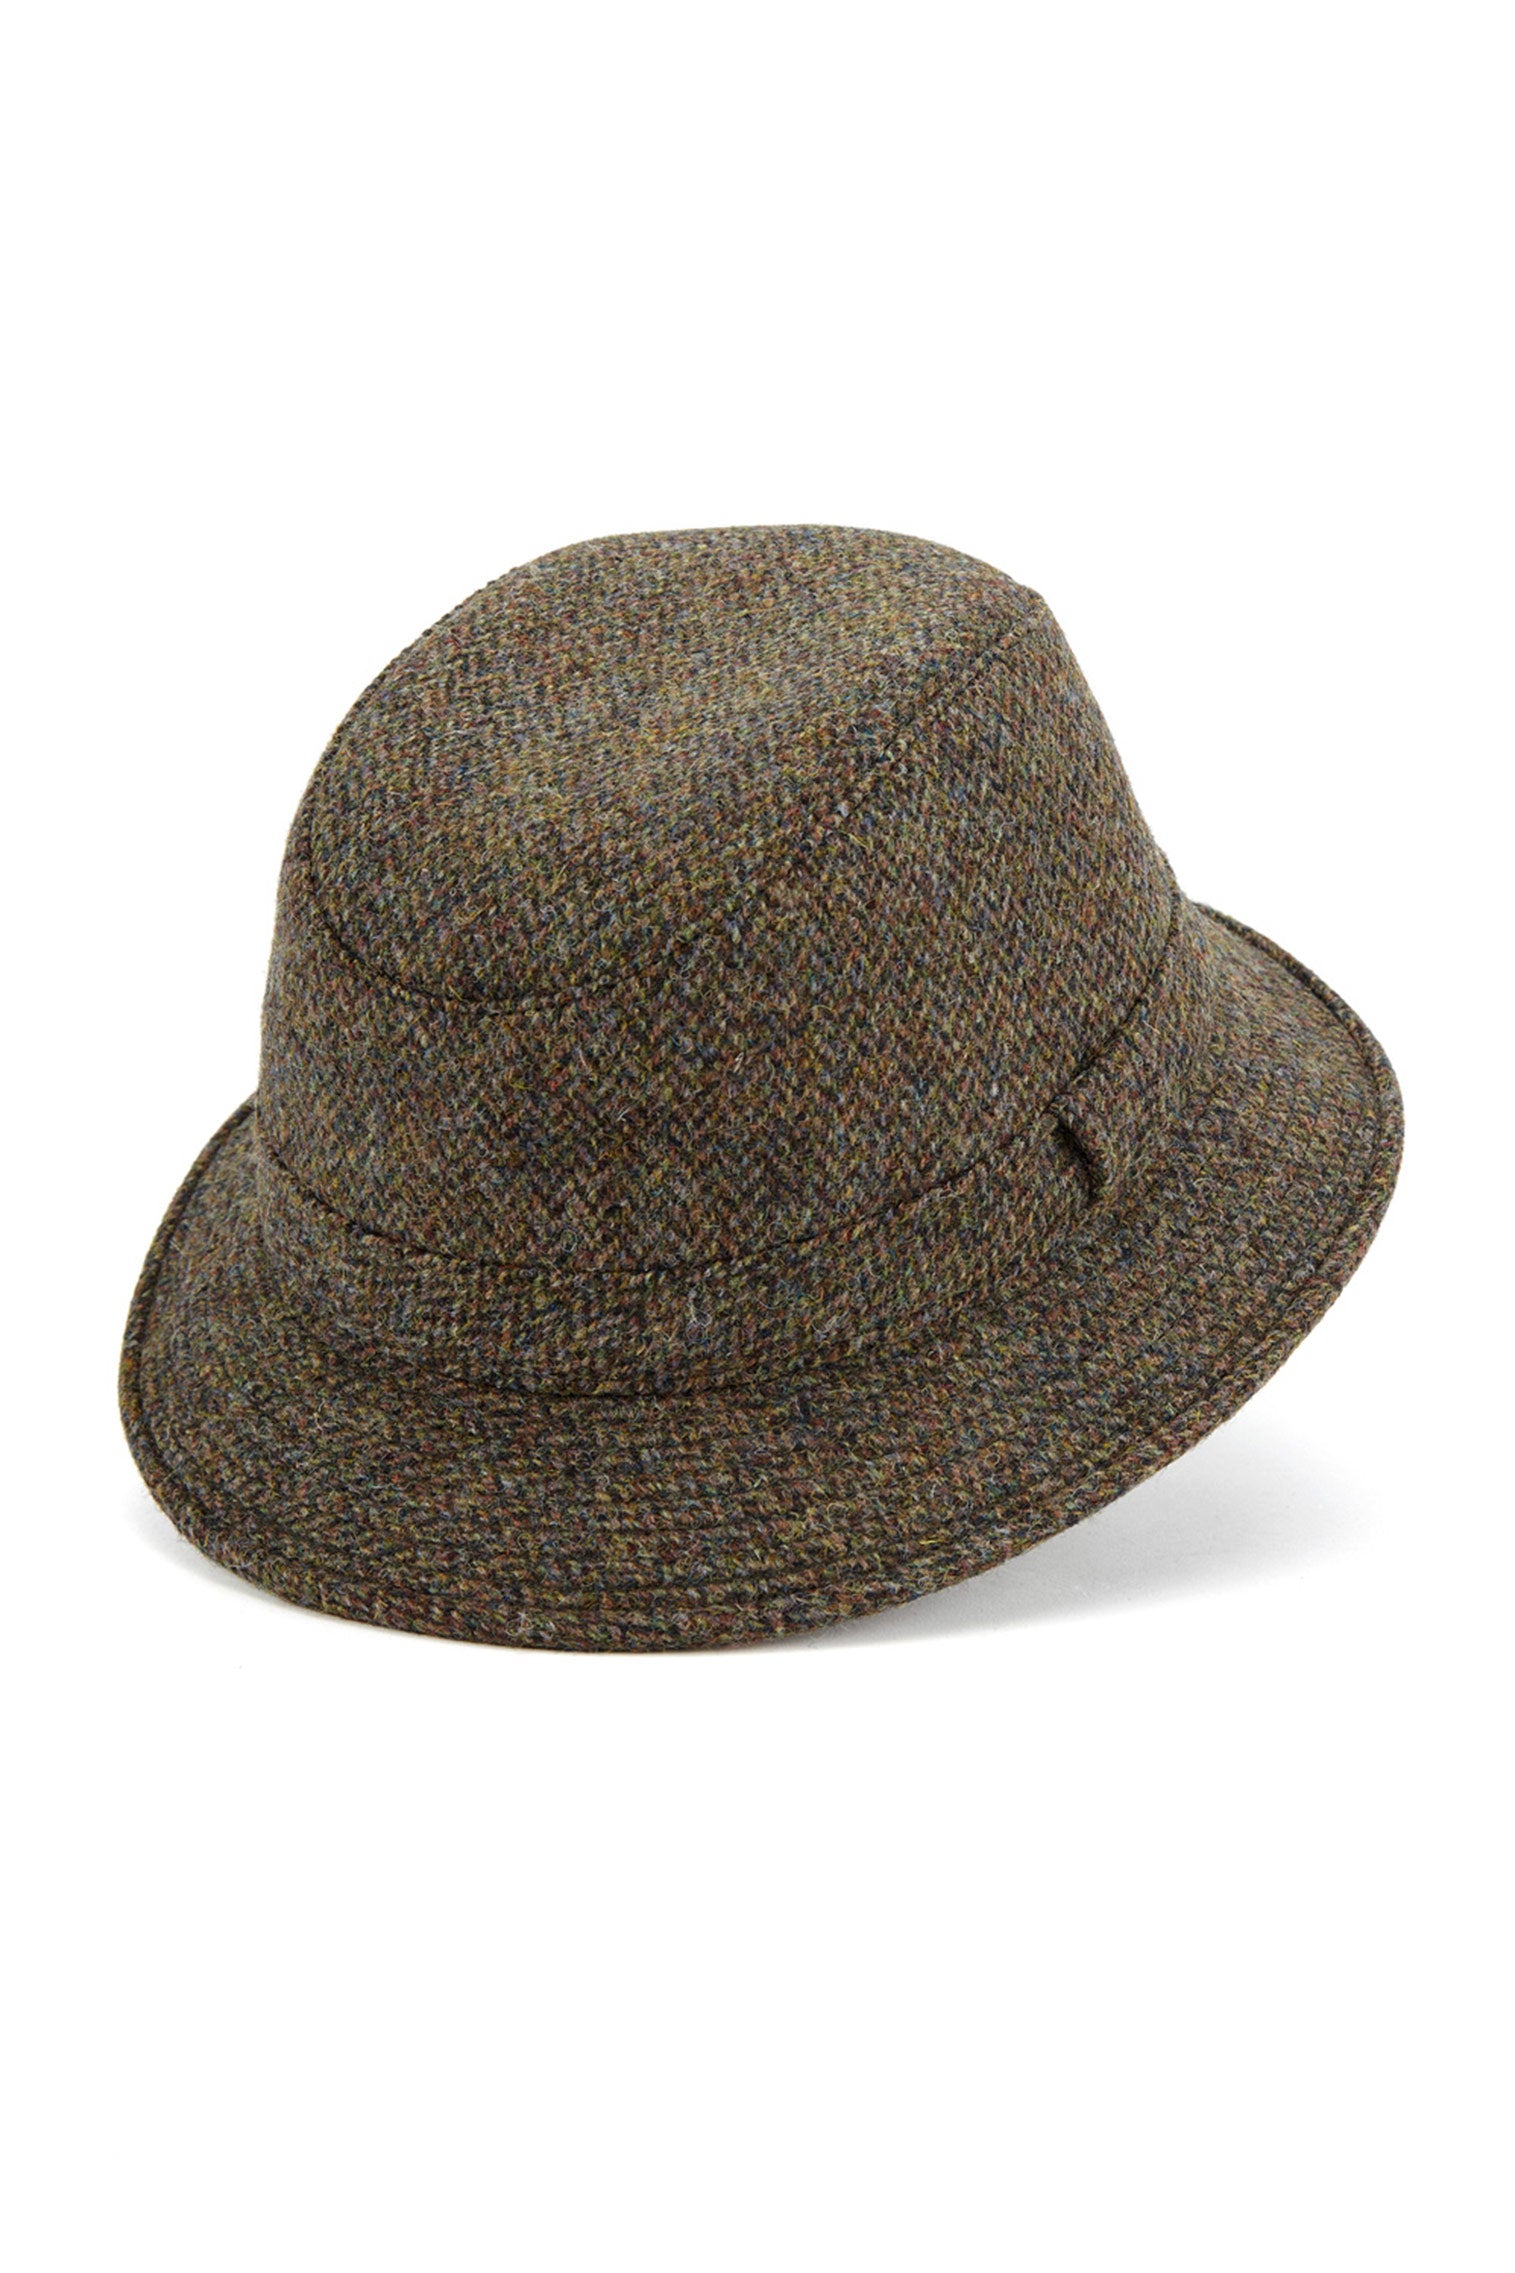 Grouse Tweed Rollable Hat - Products - Lock & Co. Hatters London UK